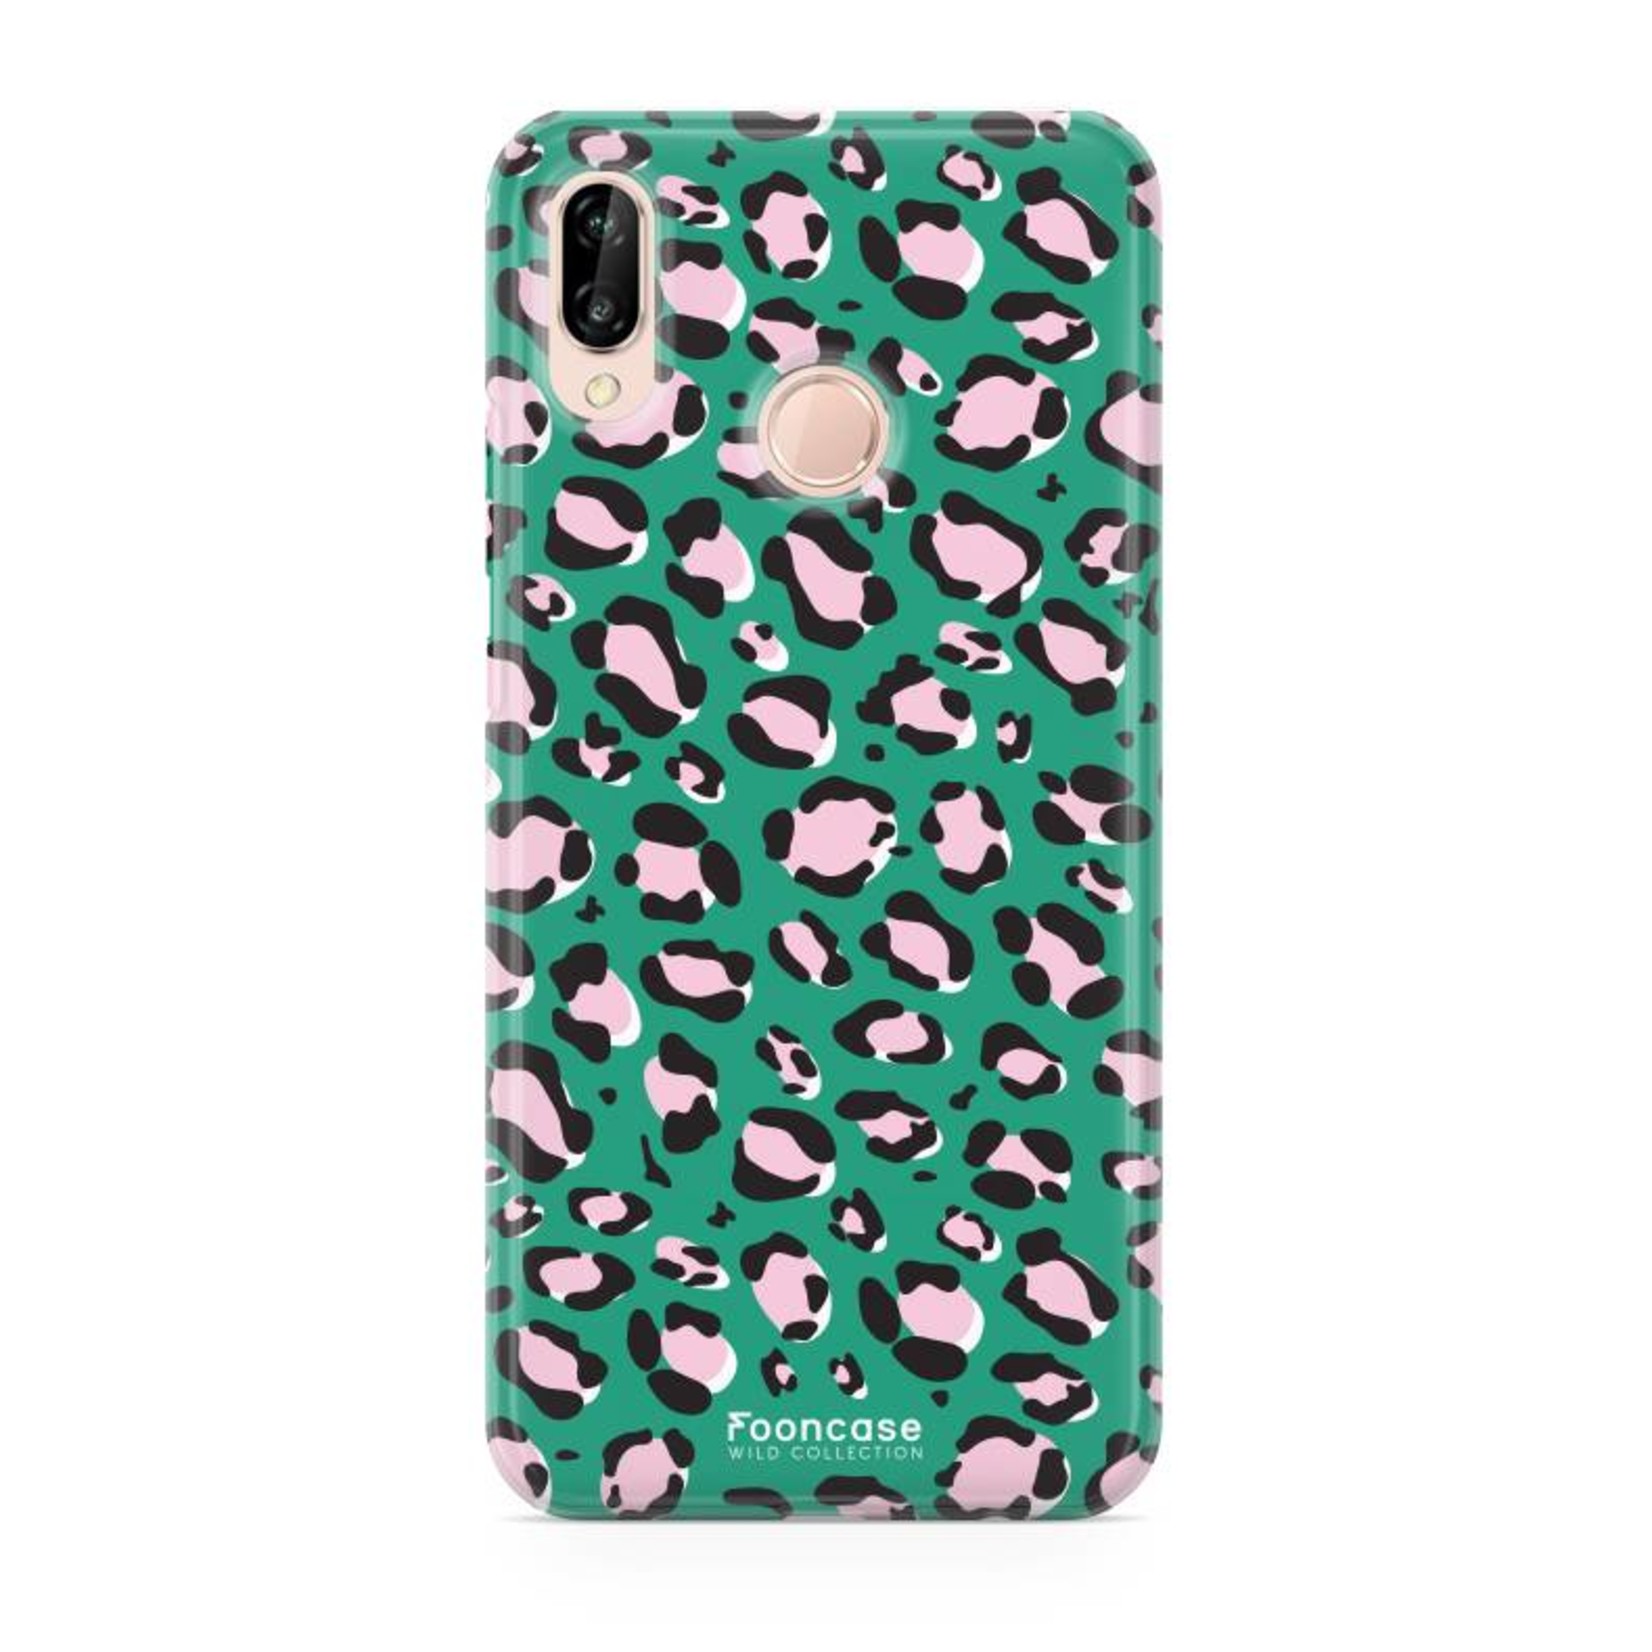 FOONCASE Huawei P20 Lite - WILD COLLECTION / Green